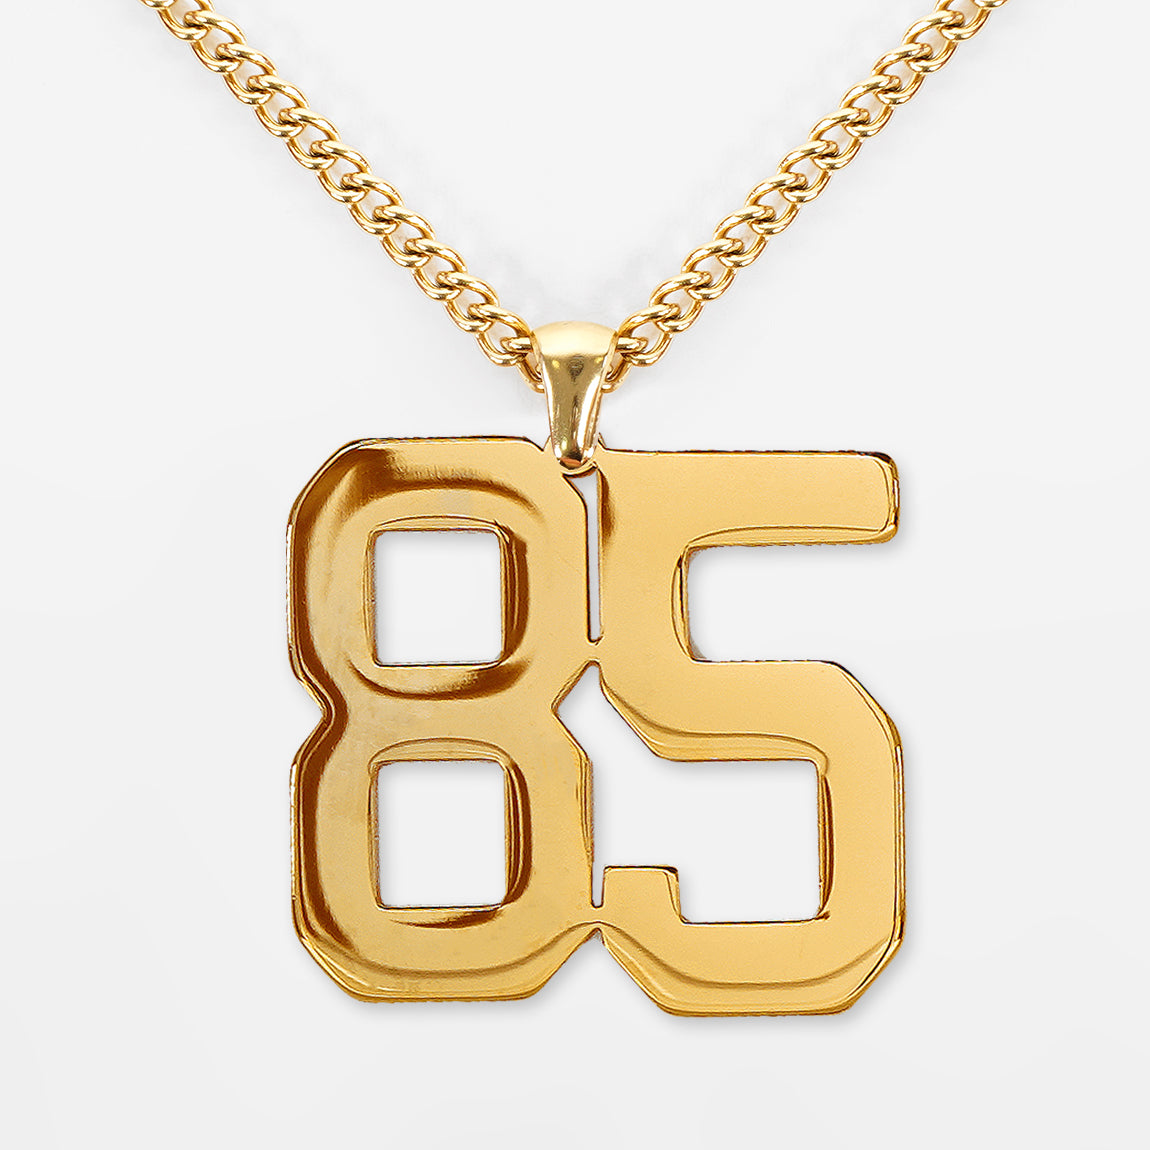 85 Number Pendant with Chain Necklace - Gold Plated Stainless Steel